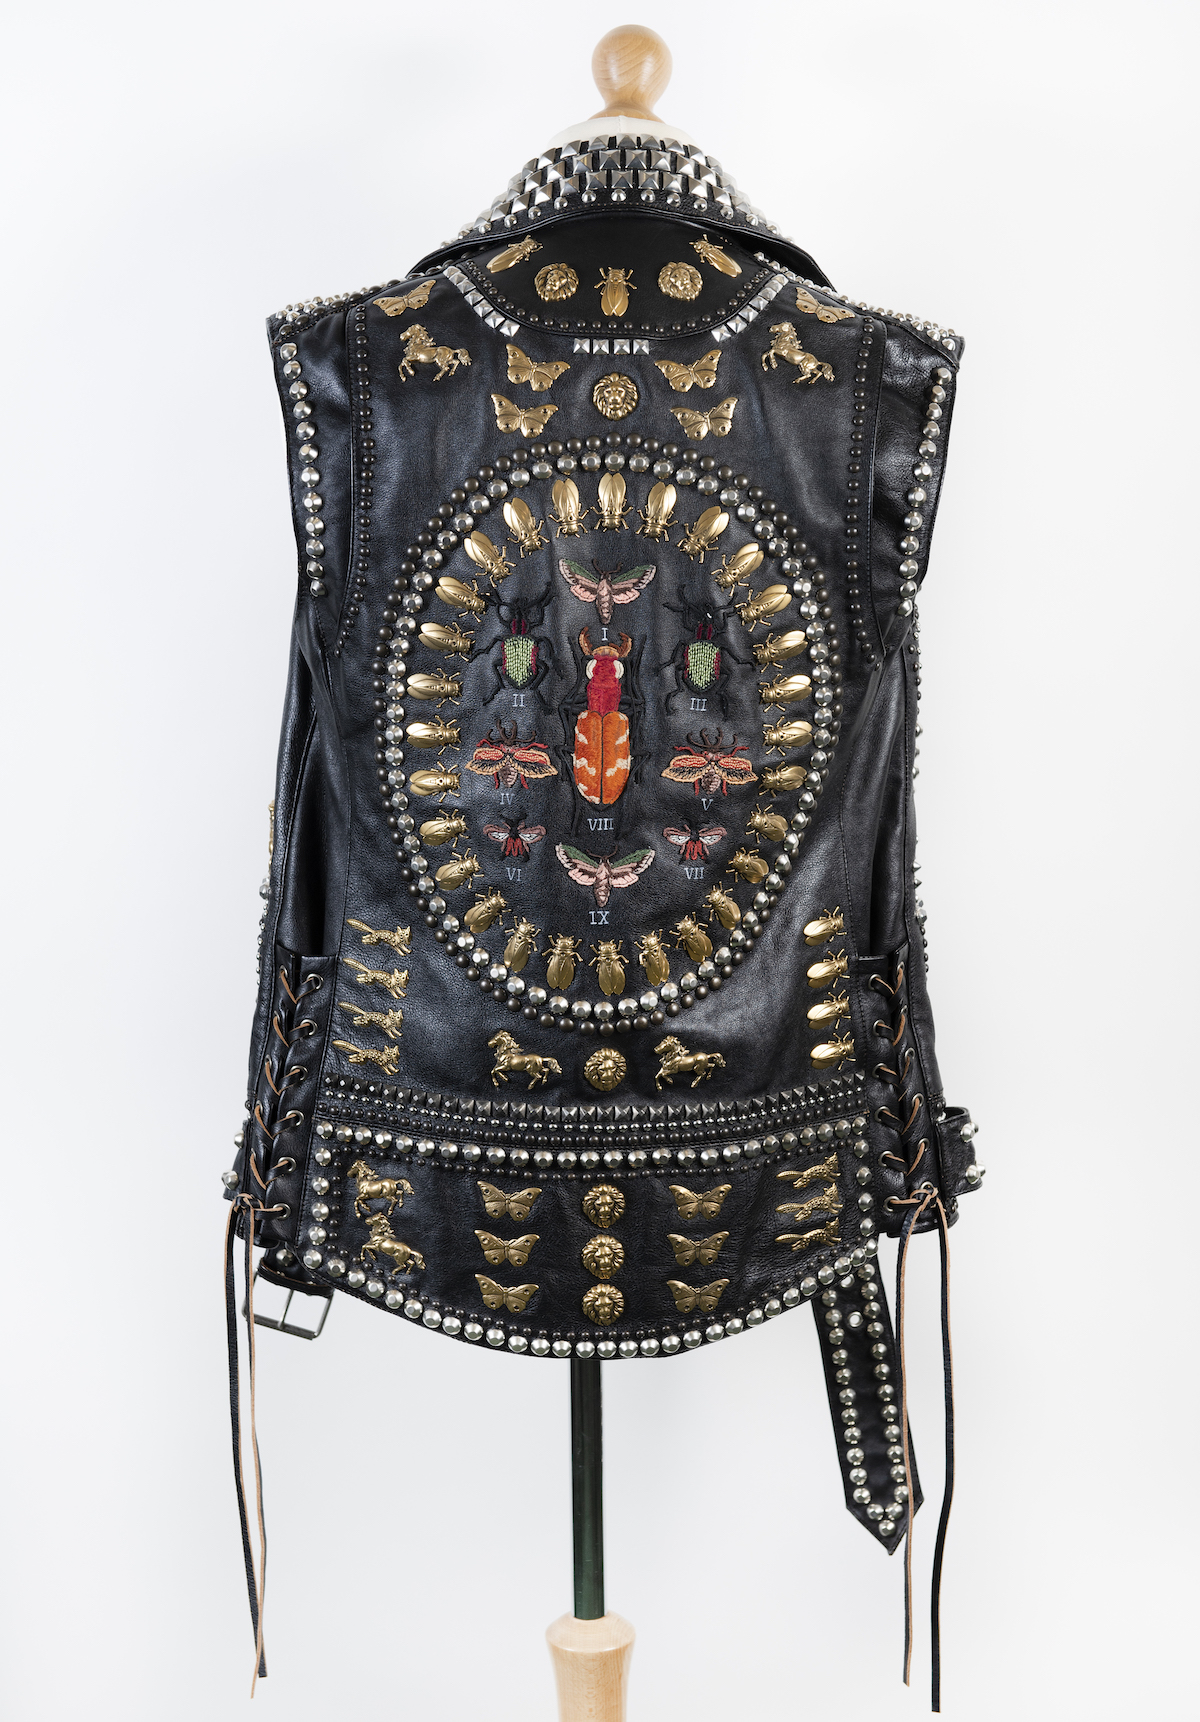 Ozzy Osbourne Gucci leather waist coat worn Courtesy of Sharon and Ozzy Osbourne - No More Tours 2 2018 © Copyright Home of Metal 